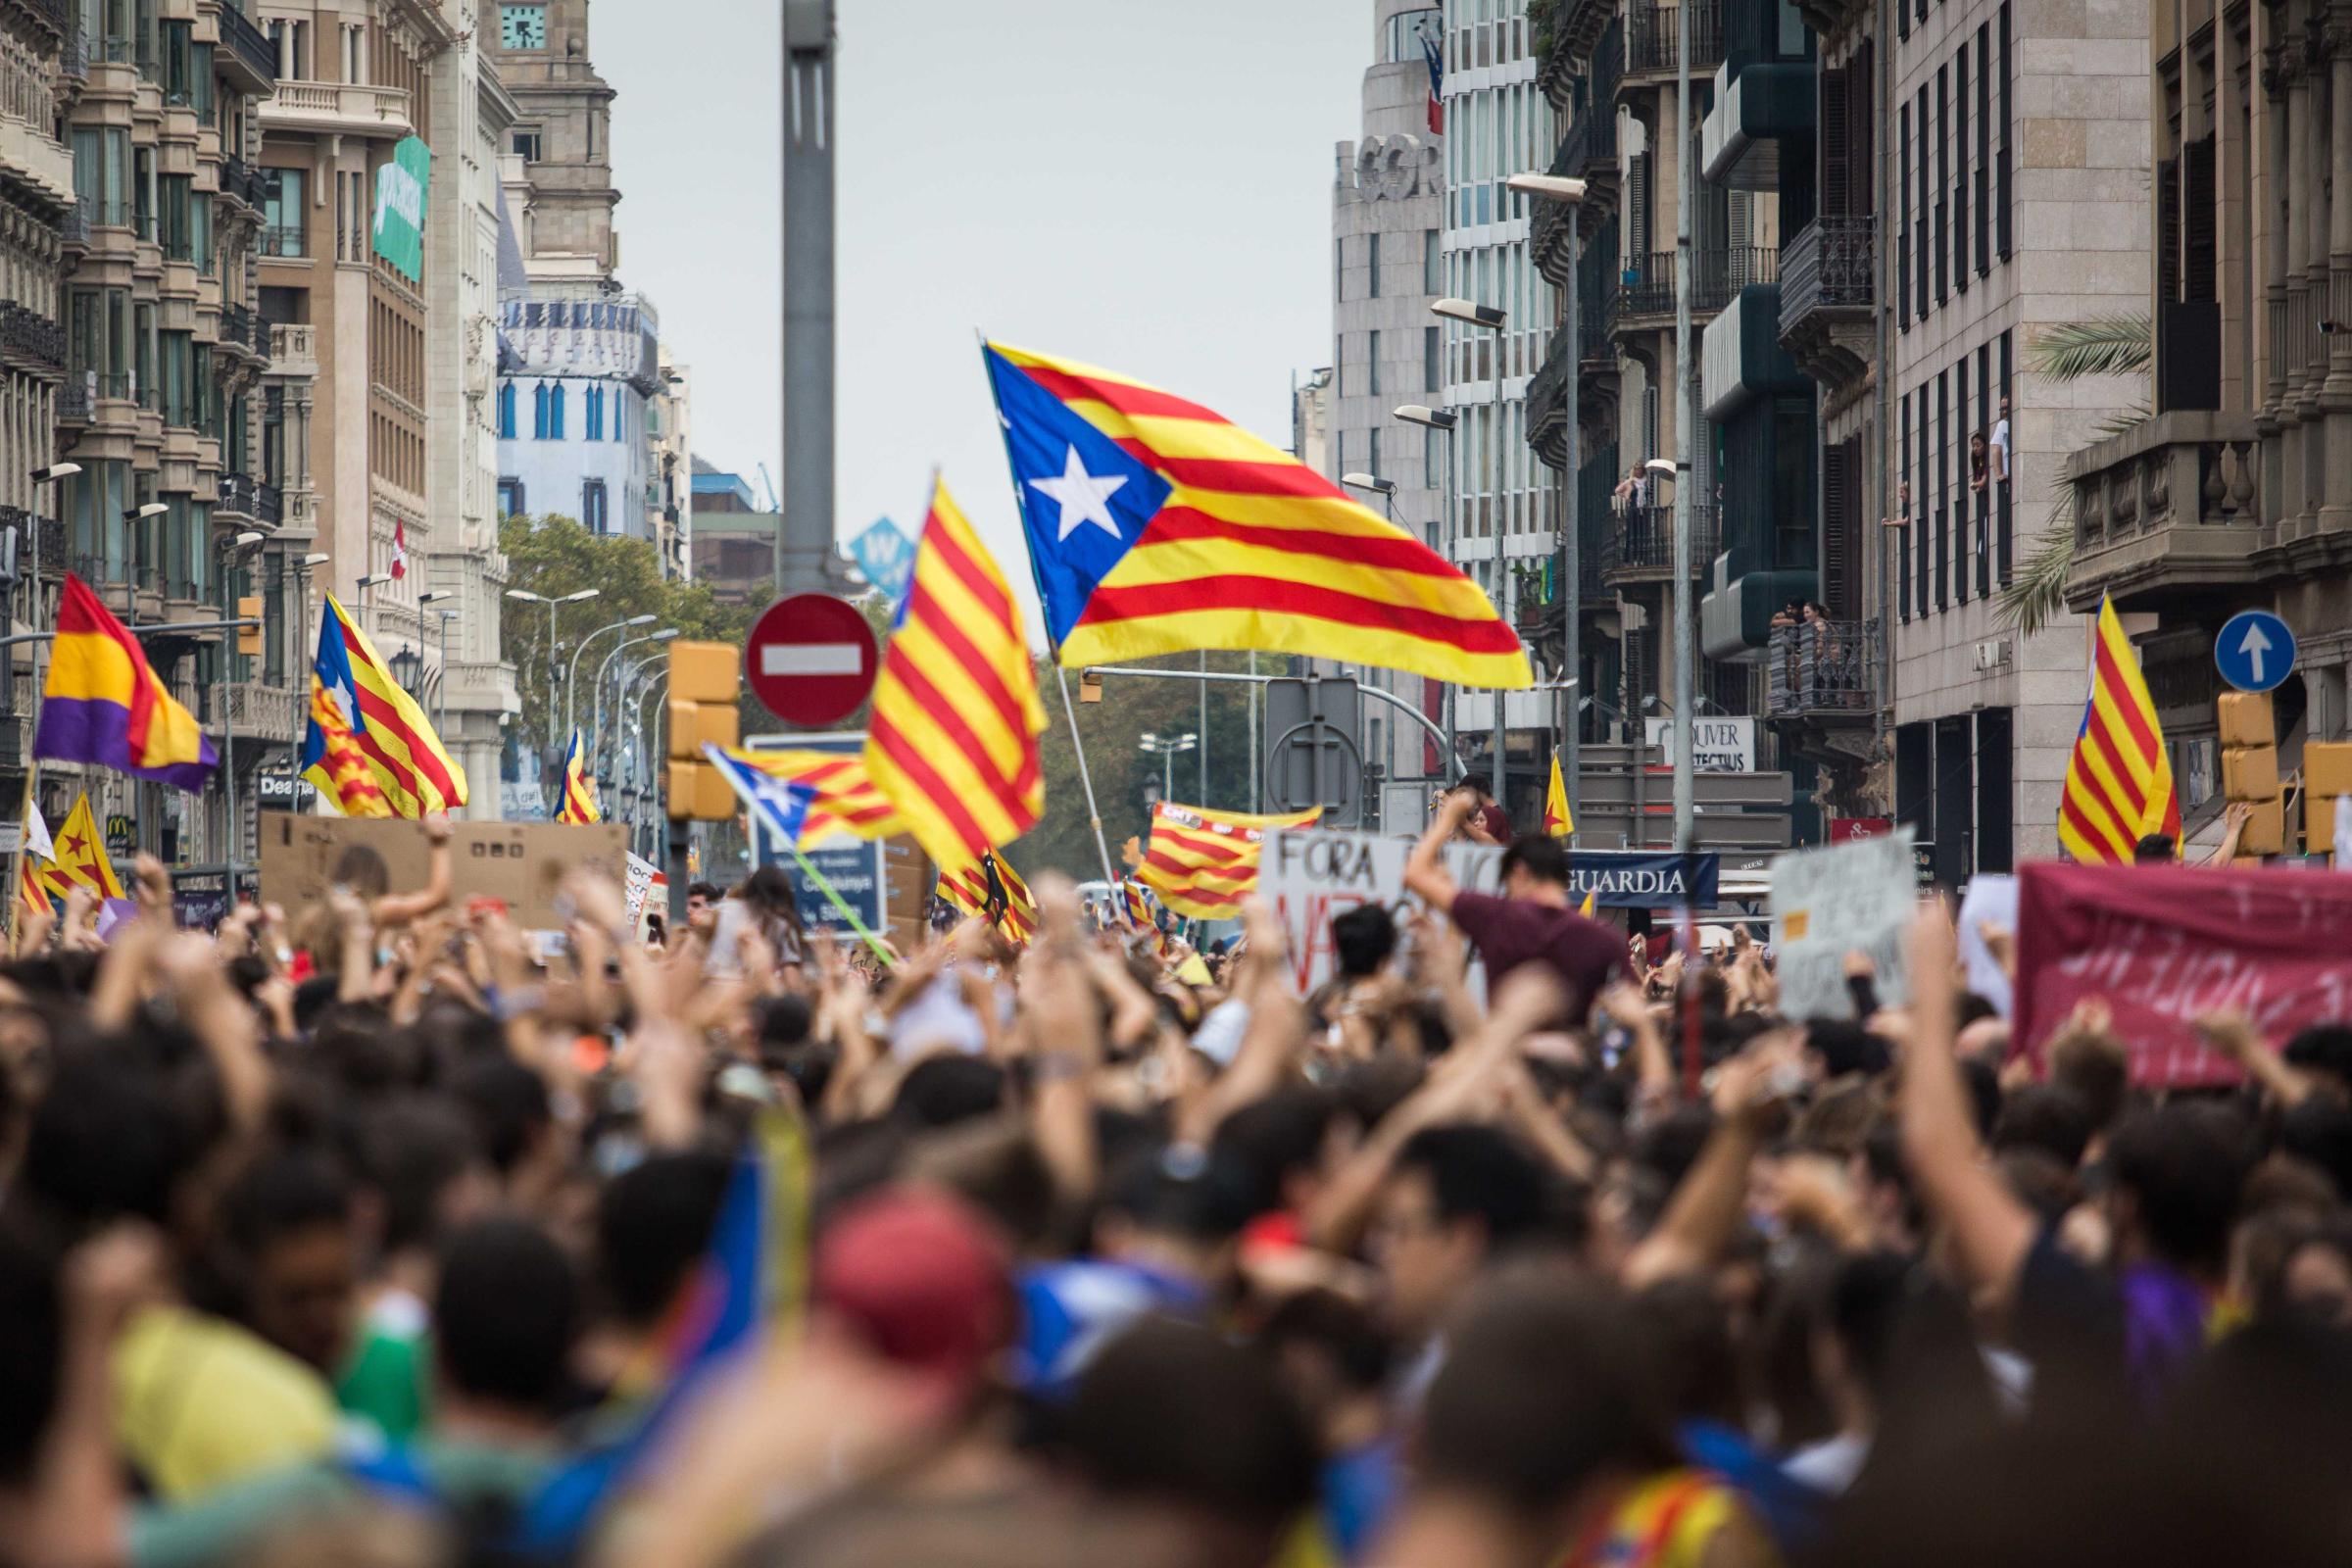 October 3rd, 2017. Barcelona, Spain. A demonstration with Catalan pro-independence flags is taking place in the streets of Barcelona in the days...